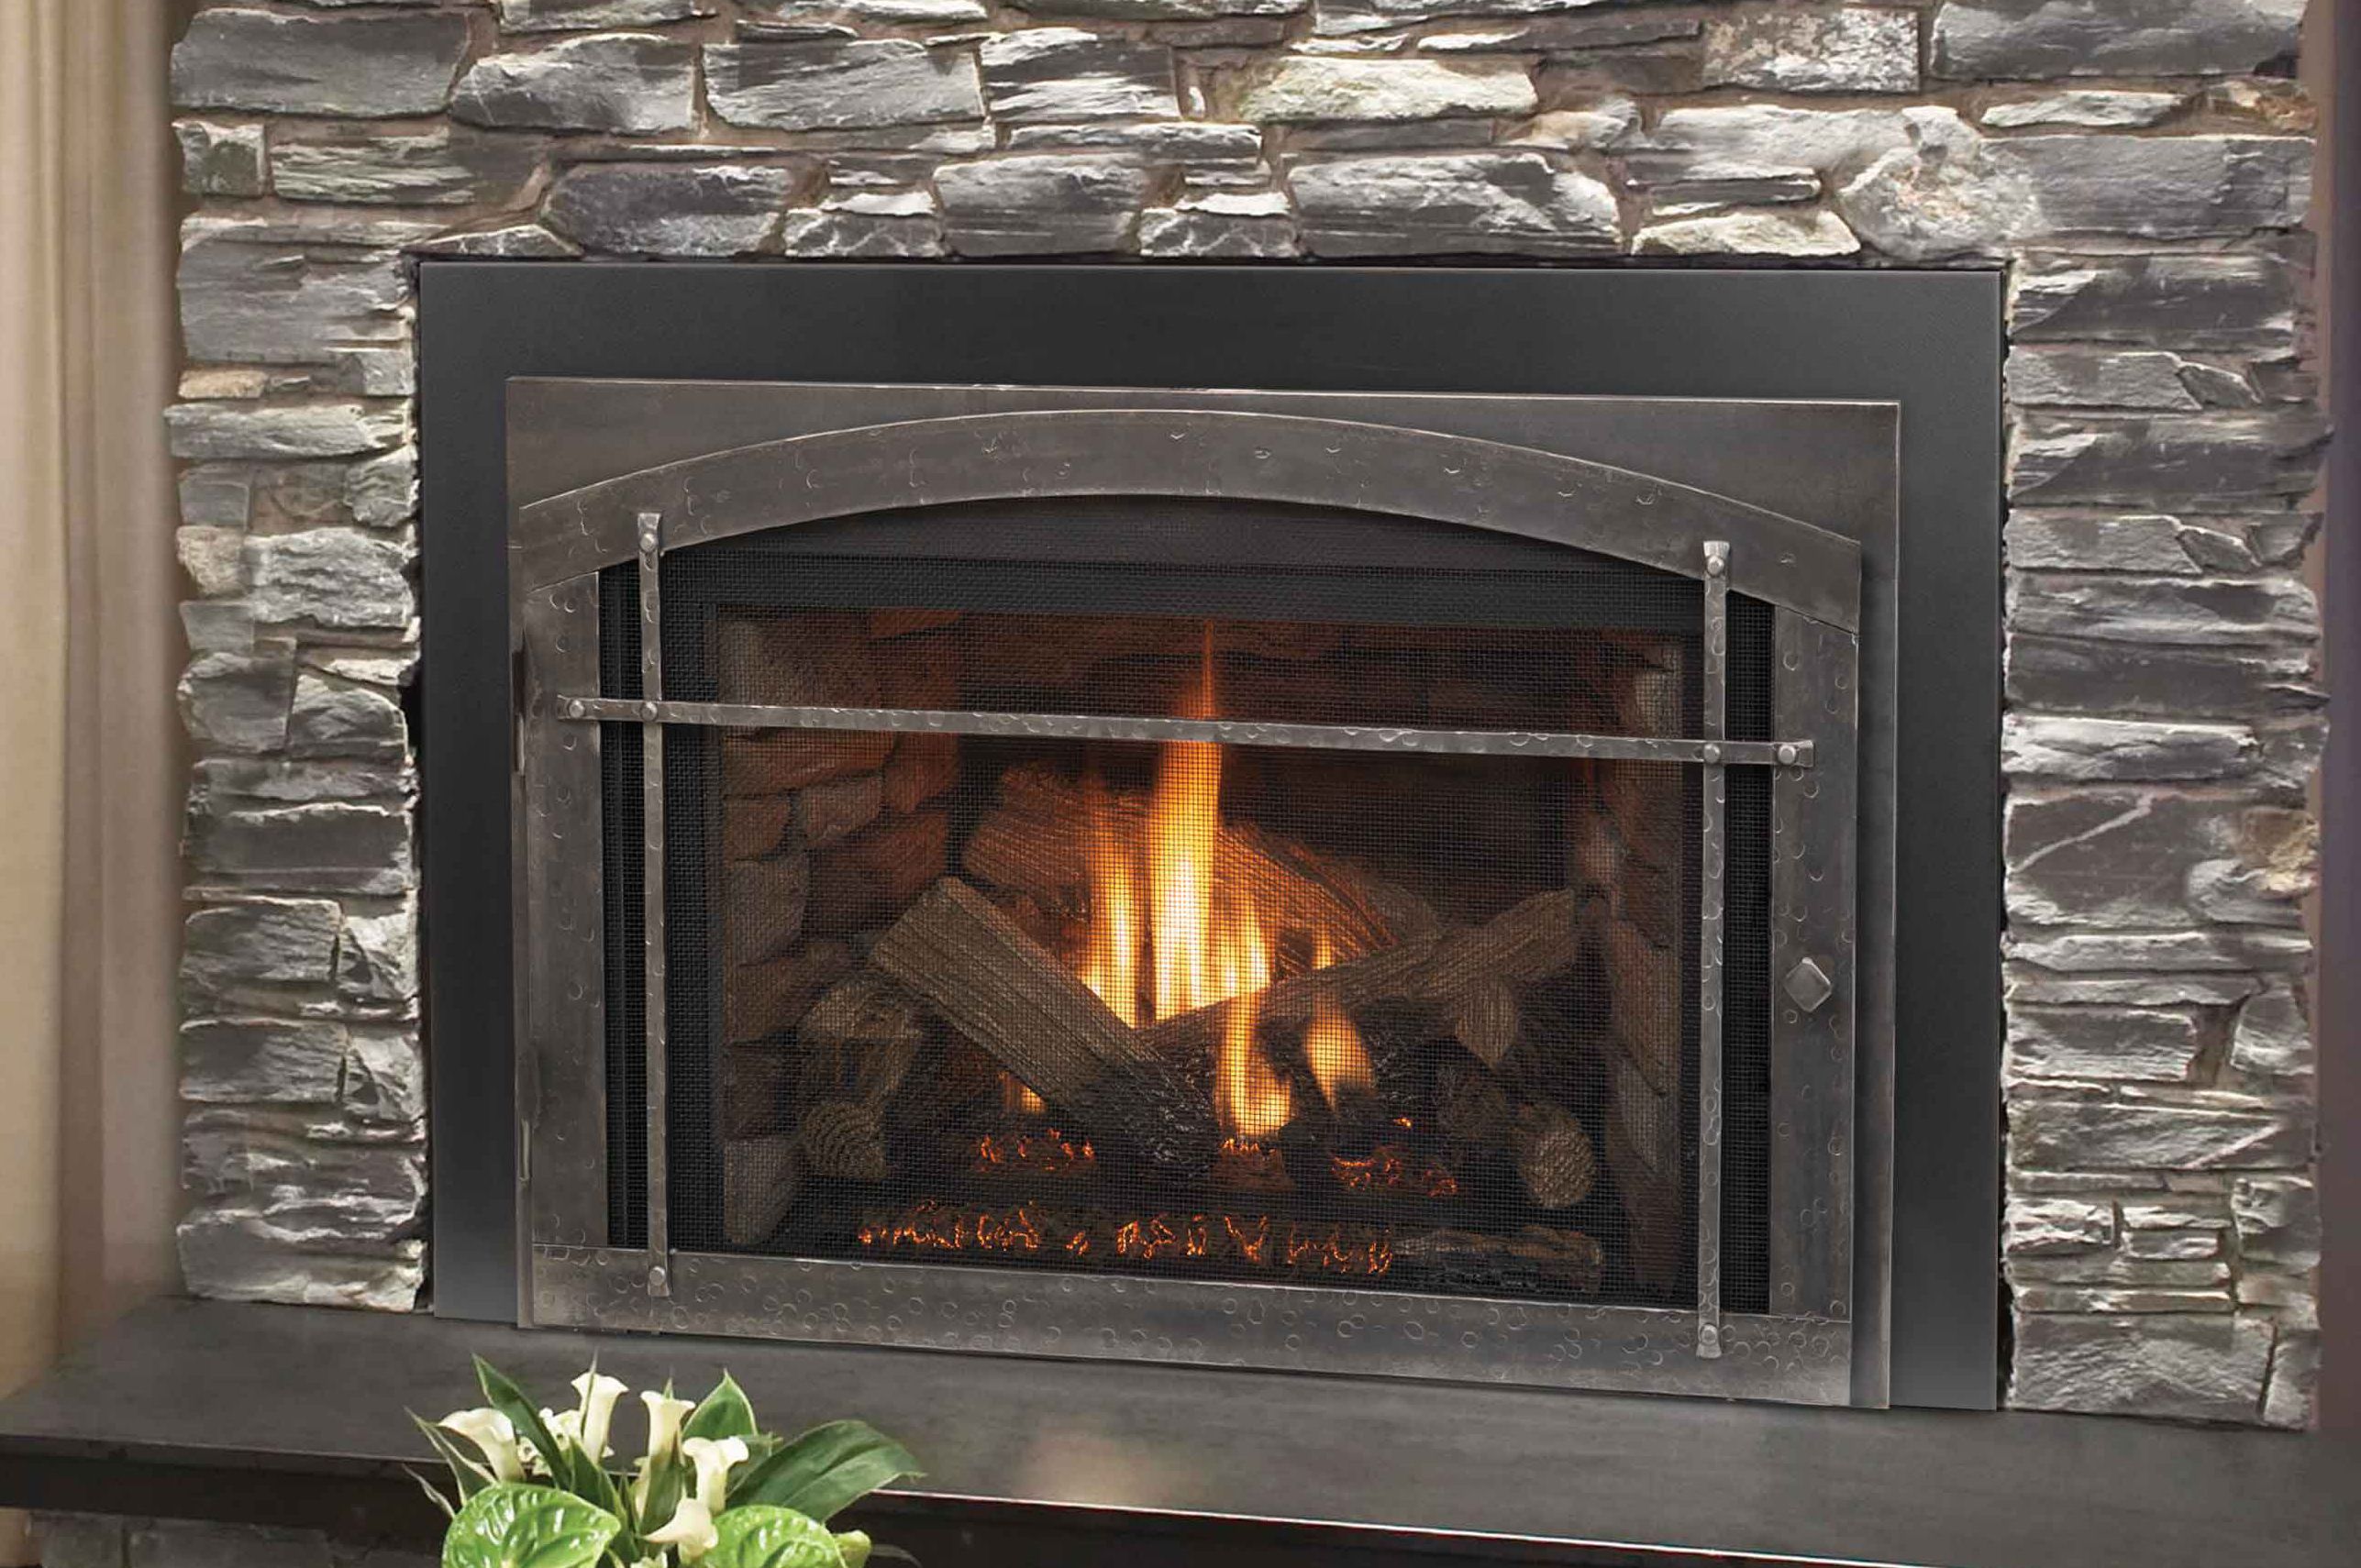 Wood Stove In Fireplace Vs Insert Fresh Woodburning Fireplace Inserts